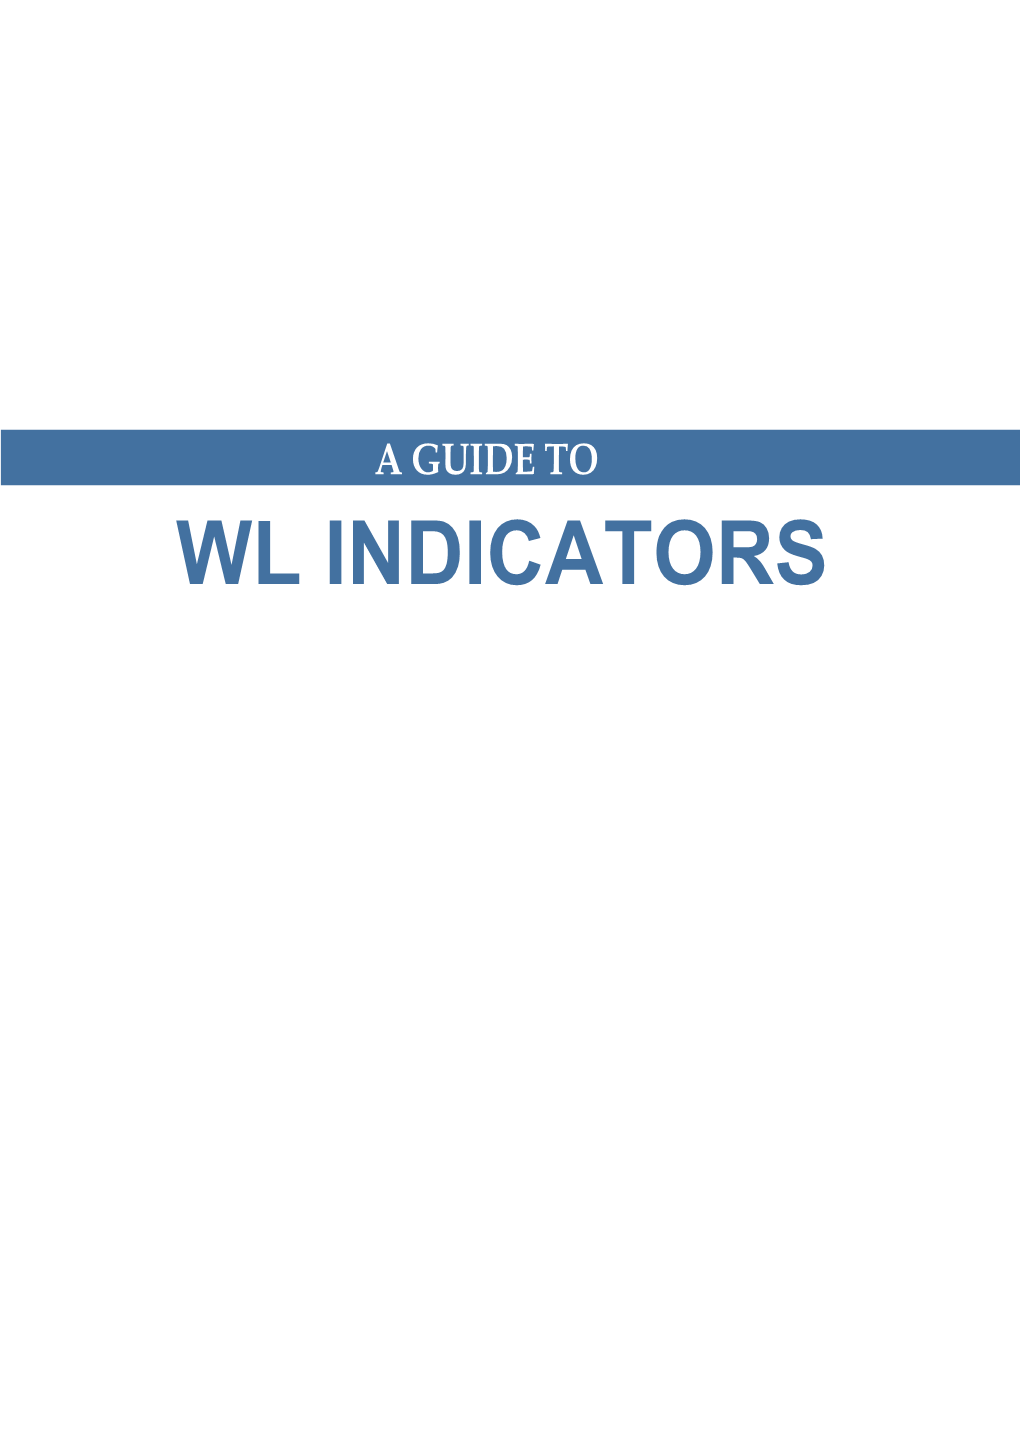 A Guide to WL Indicators